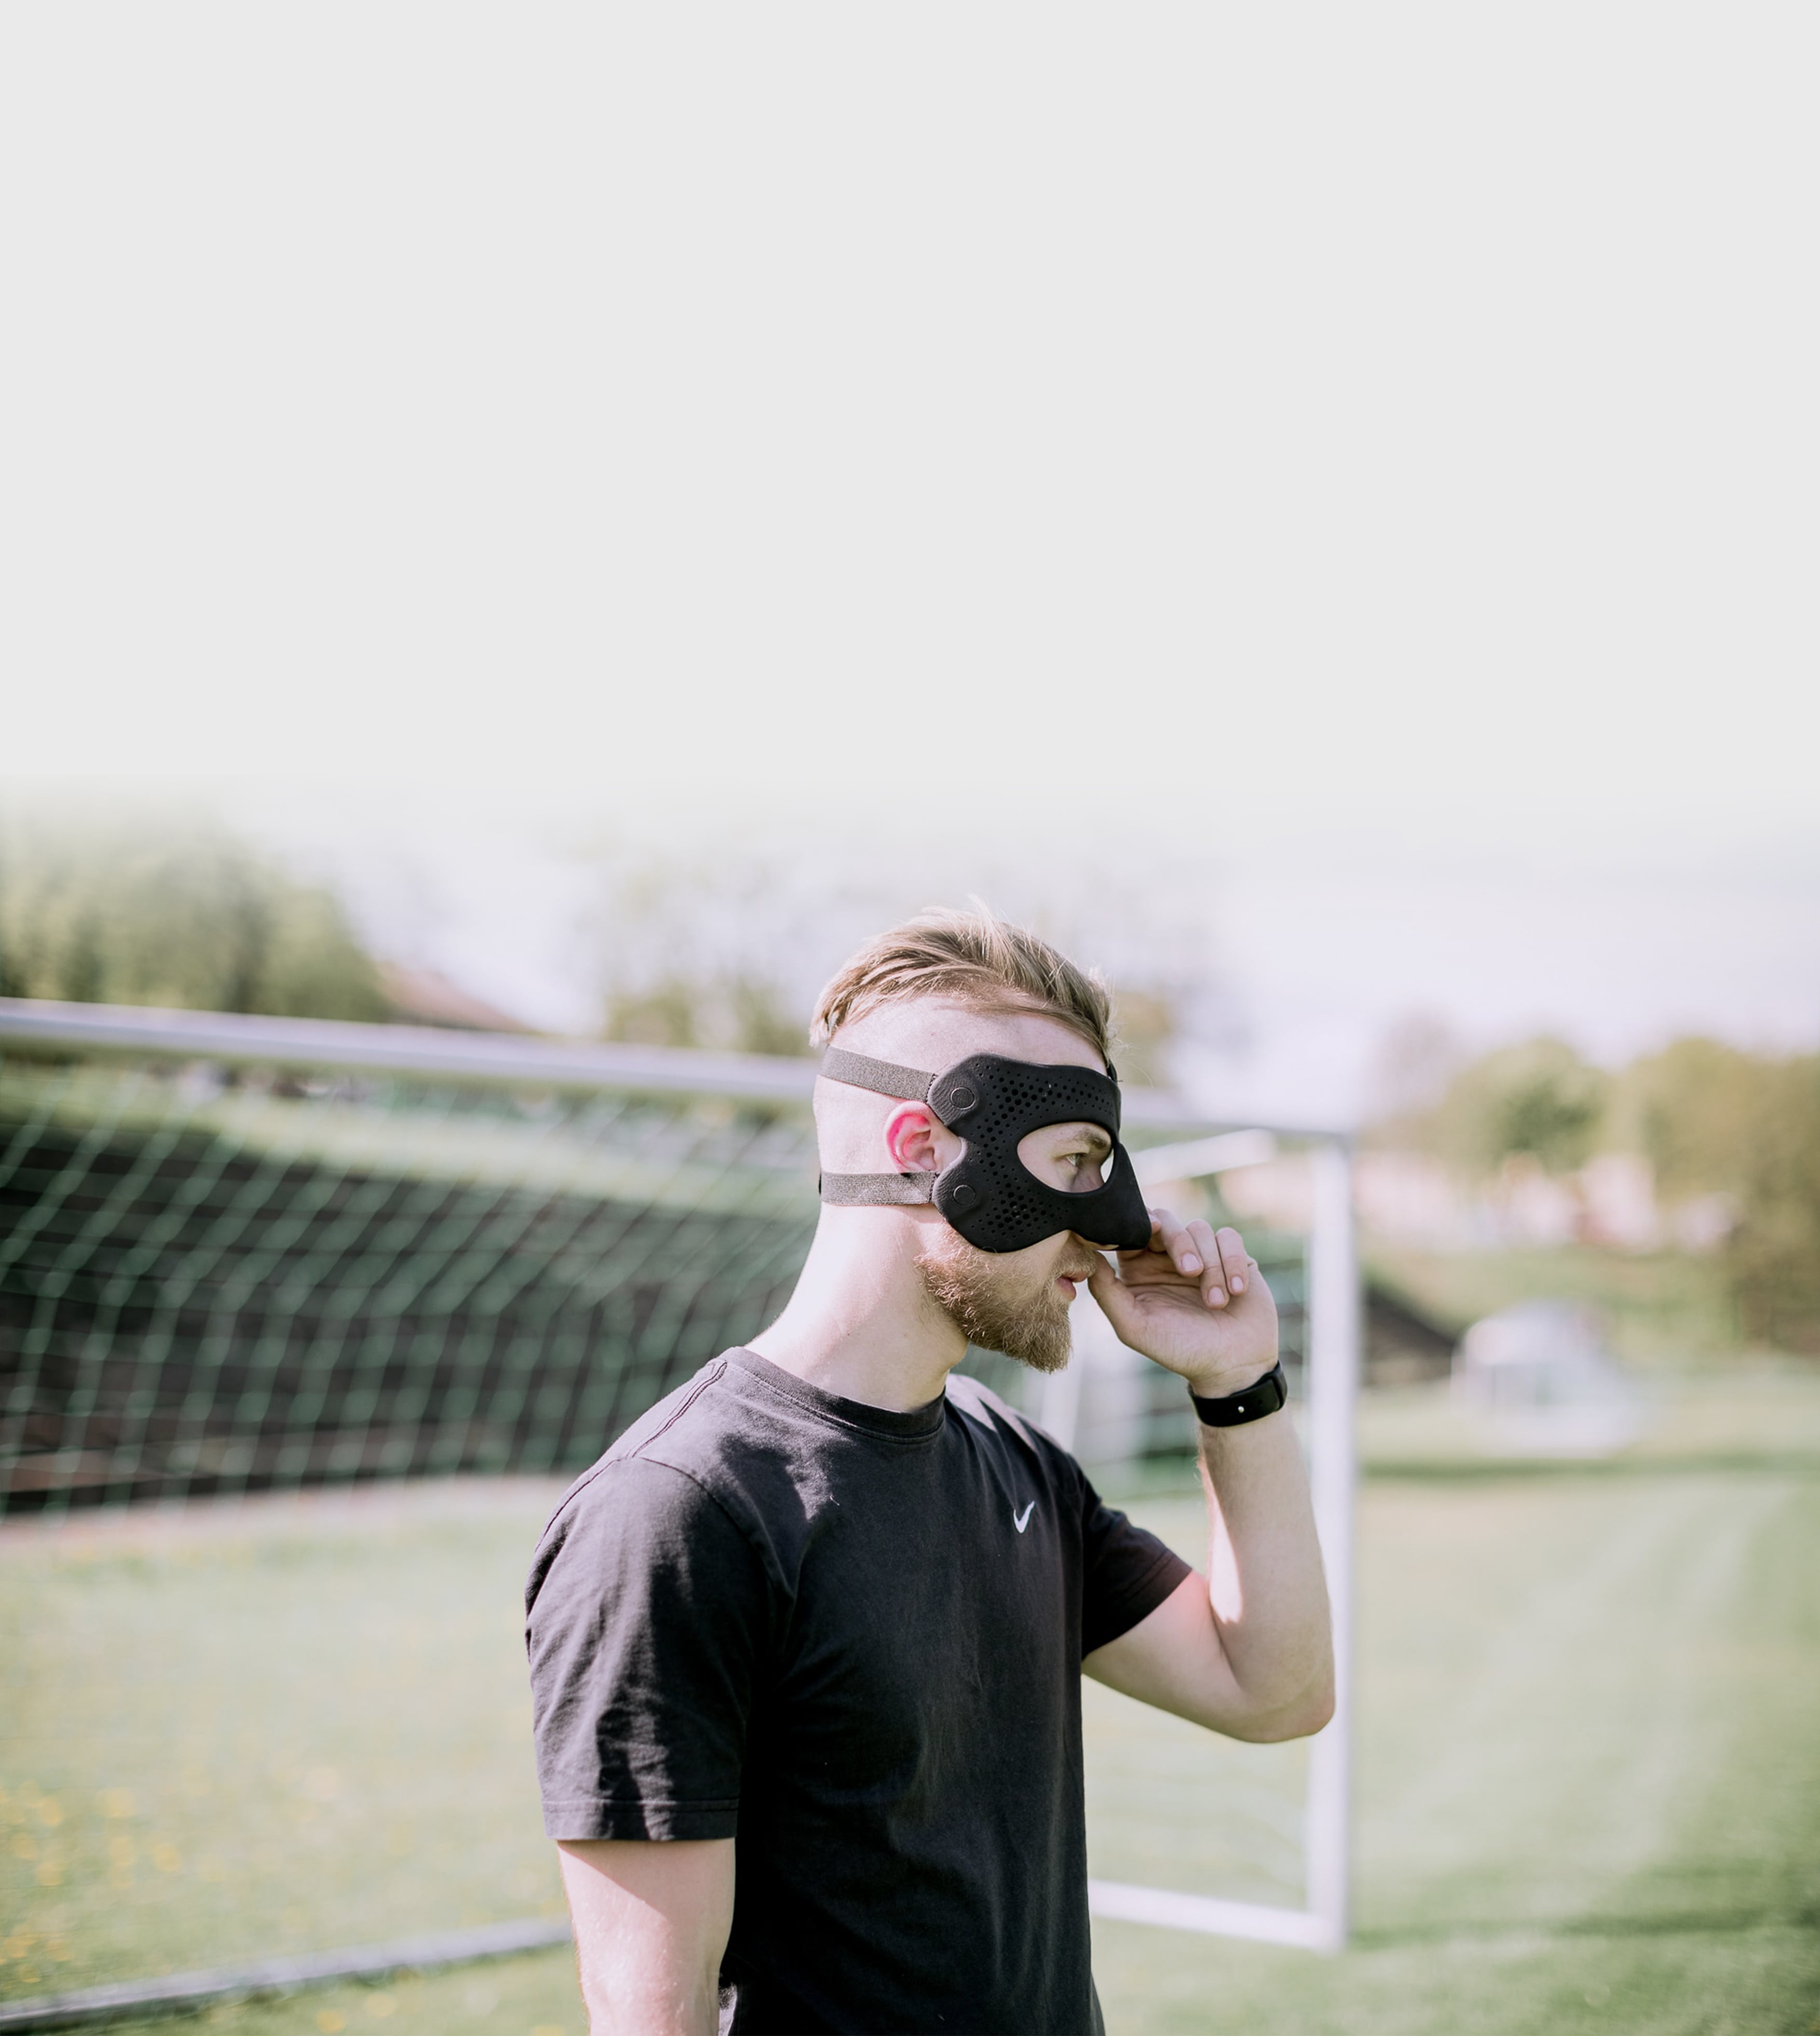 Raptor - Protective Face Mask For Athletes